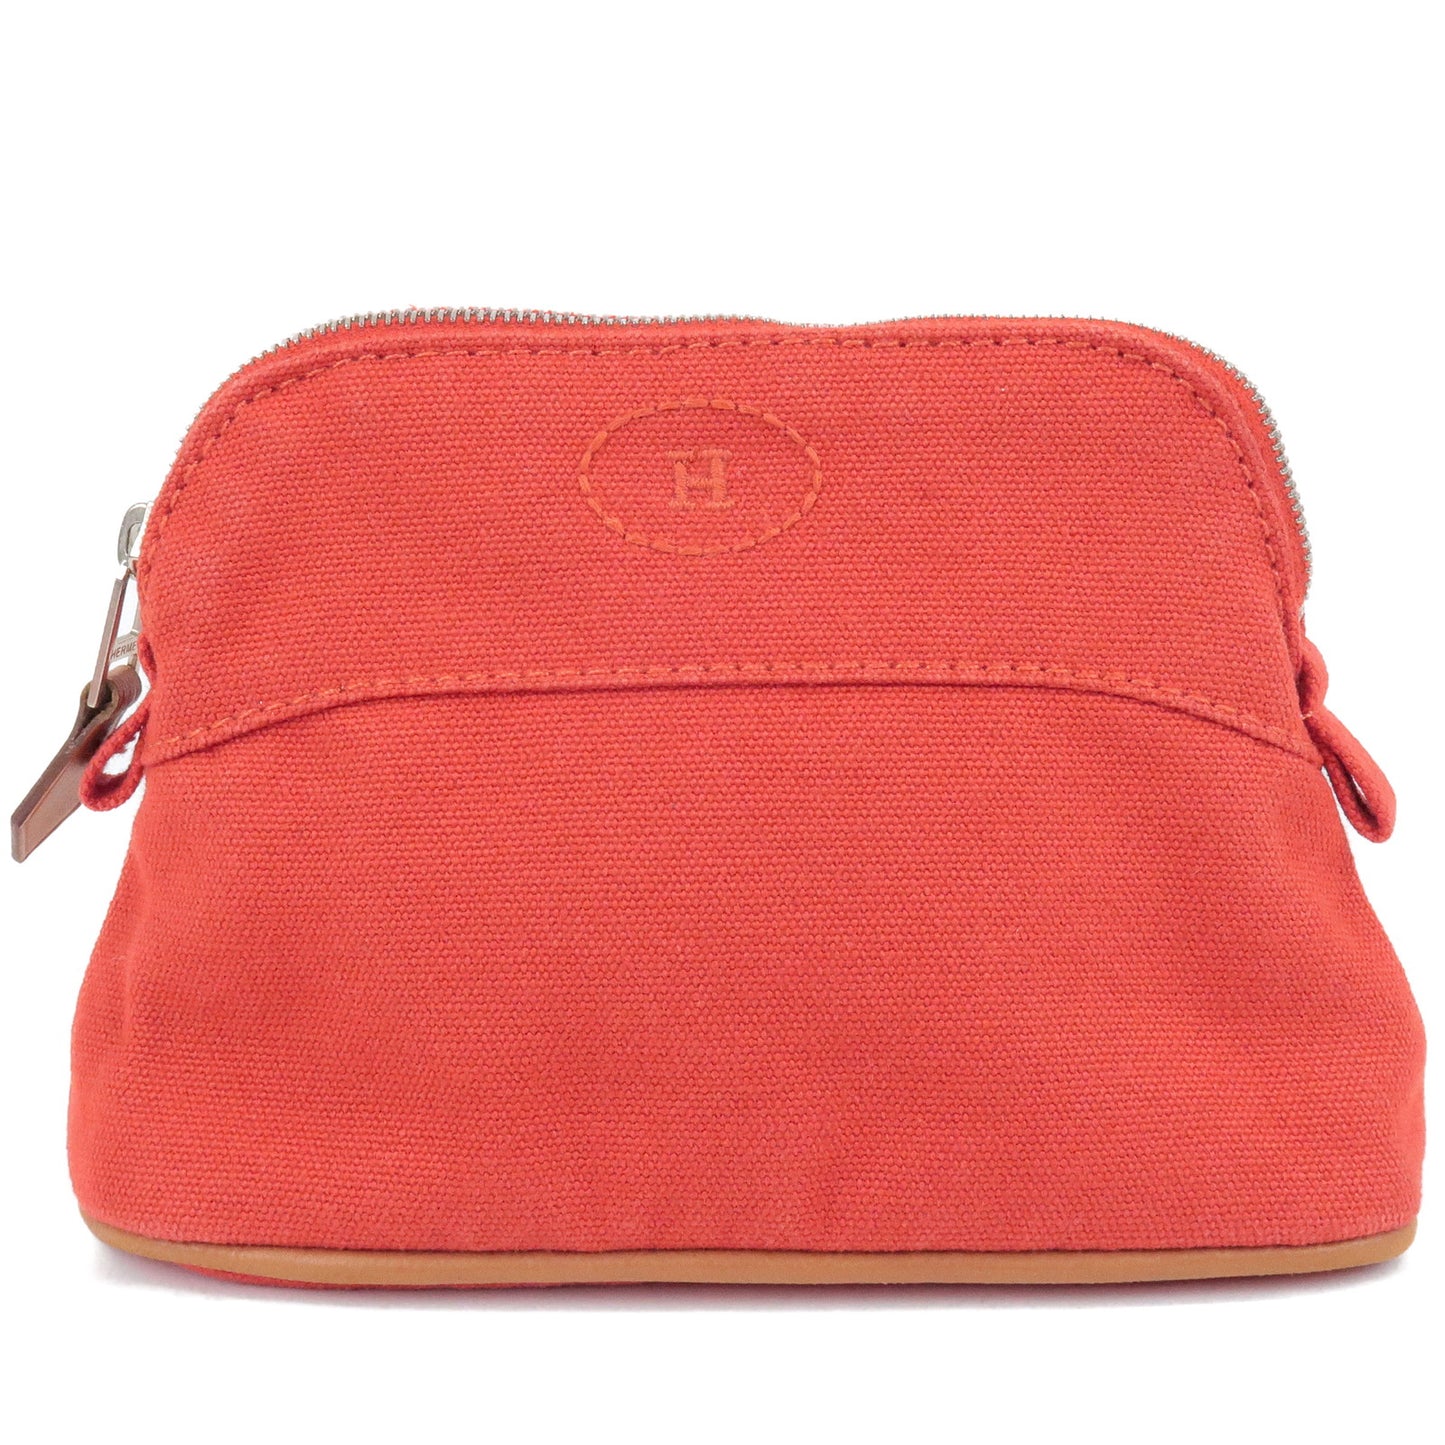 HERMES-Bolide-Pouch-Canvas-Leather-Mini-Cosmetics-Bag-Red-Orange-F/S